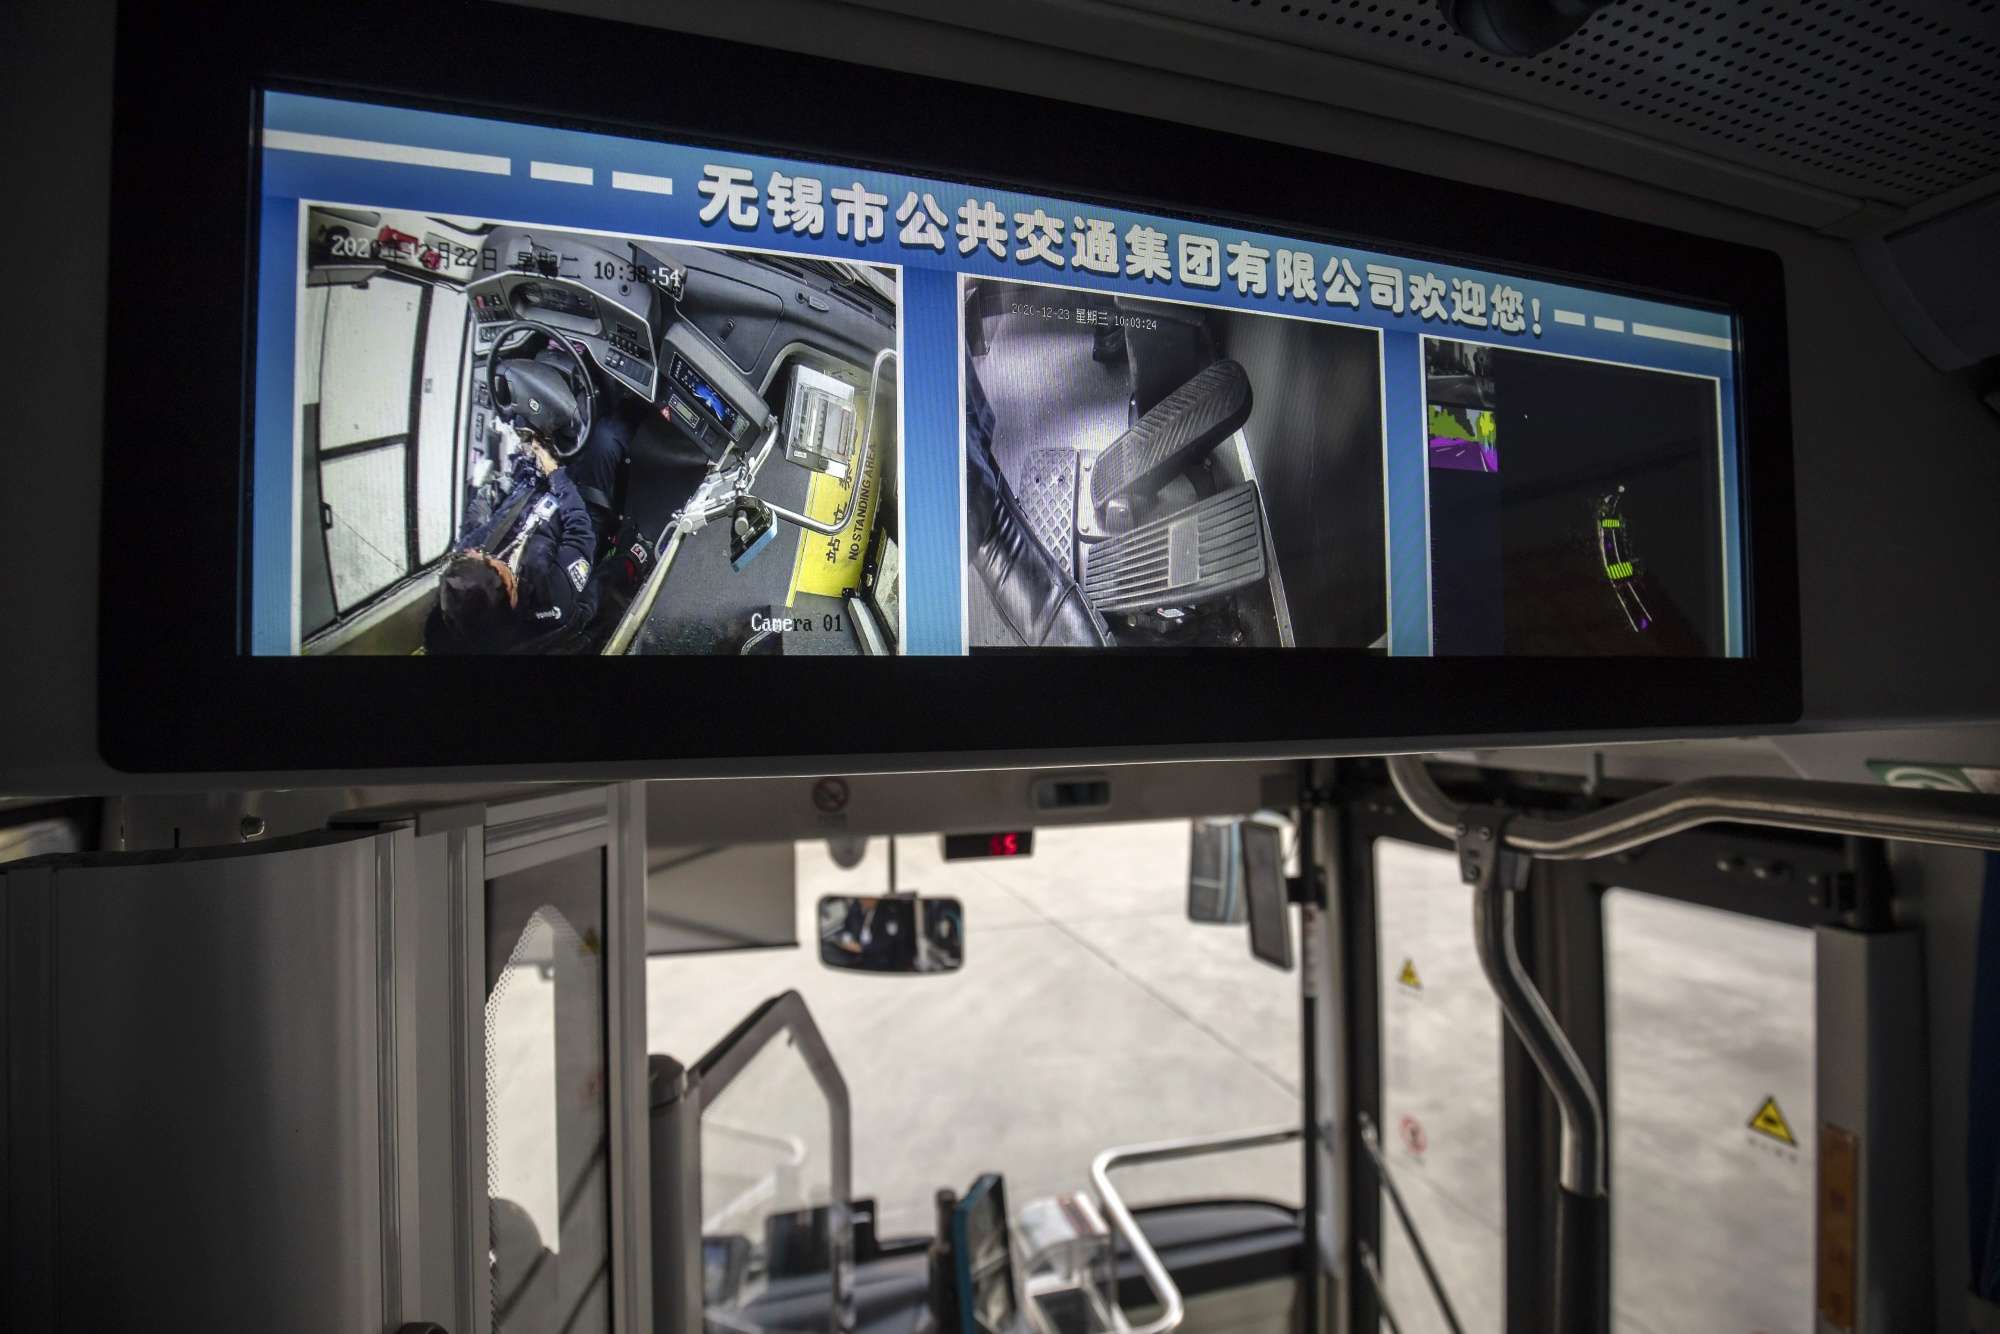 At China test site, self-driving bus is guided by surroundings. (Image: Bloomberg)